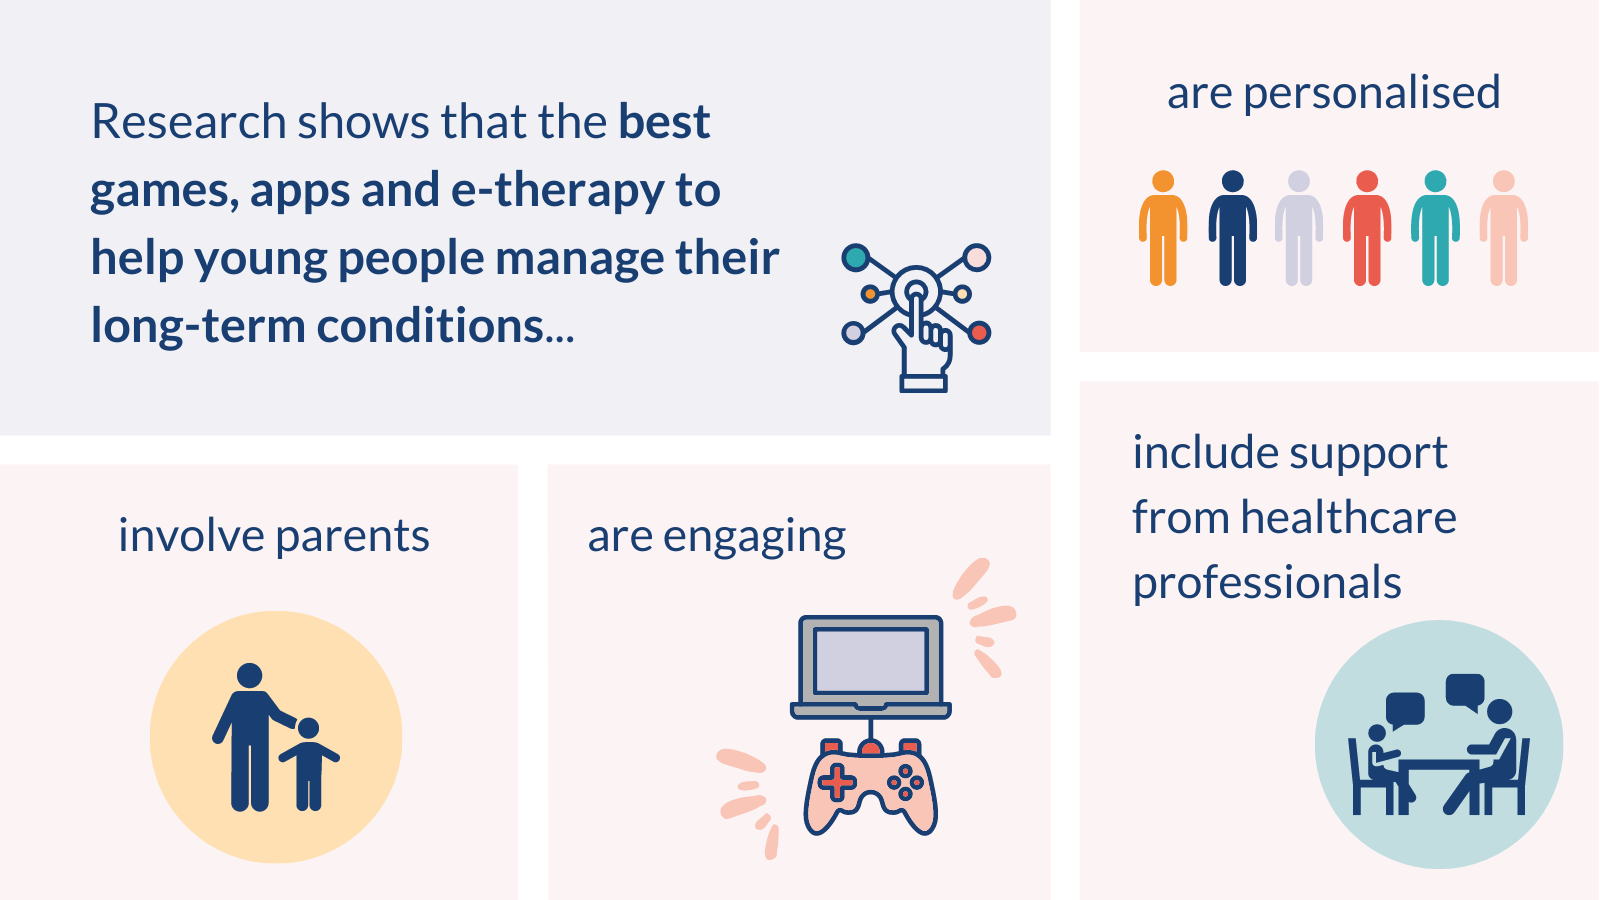 National Institute for Health and Care research infographic. Text displays: Research shows that the best games, apps and e-therapy to help young people manage their long-term conditions...are personalised, involve parents, are engaging and include support from healthcare professionals.